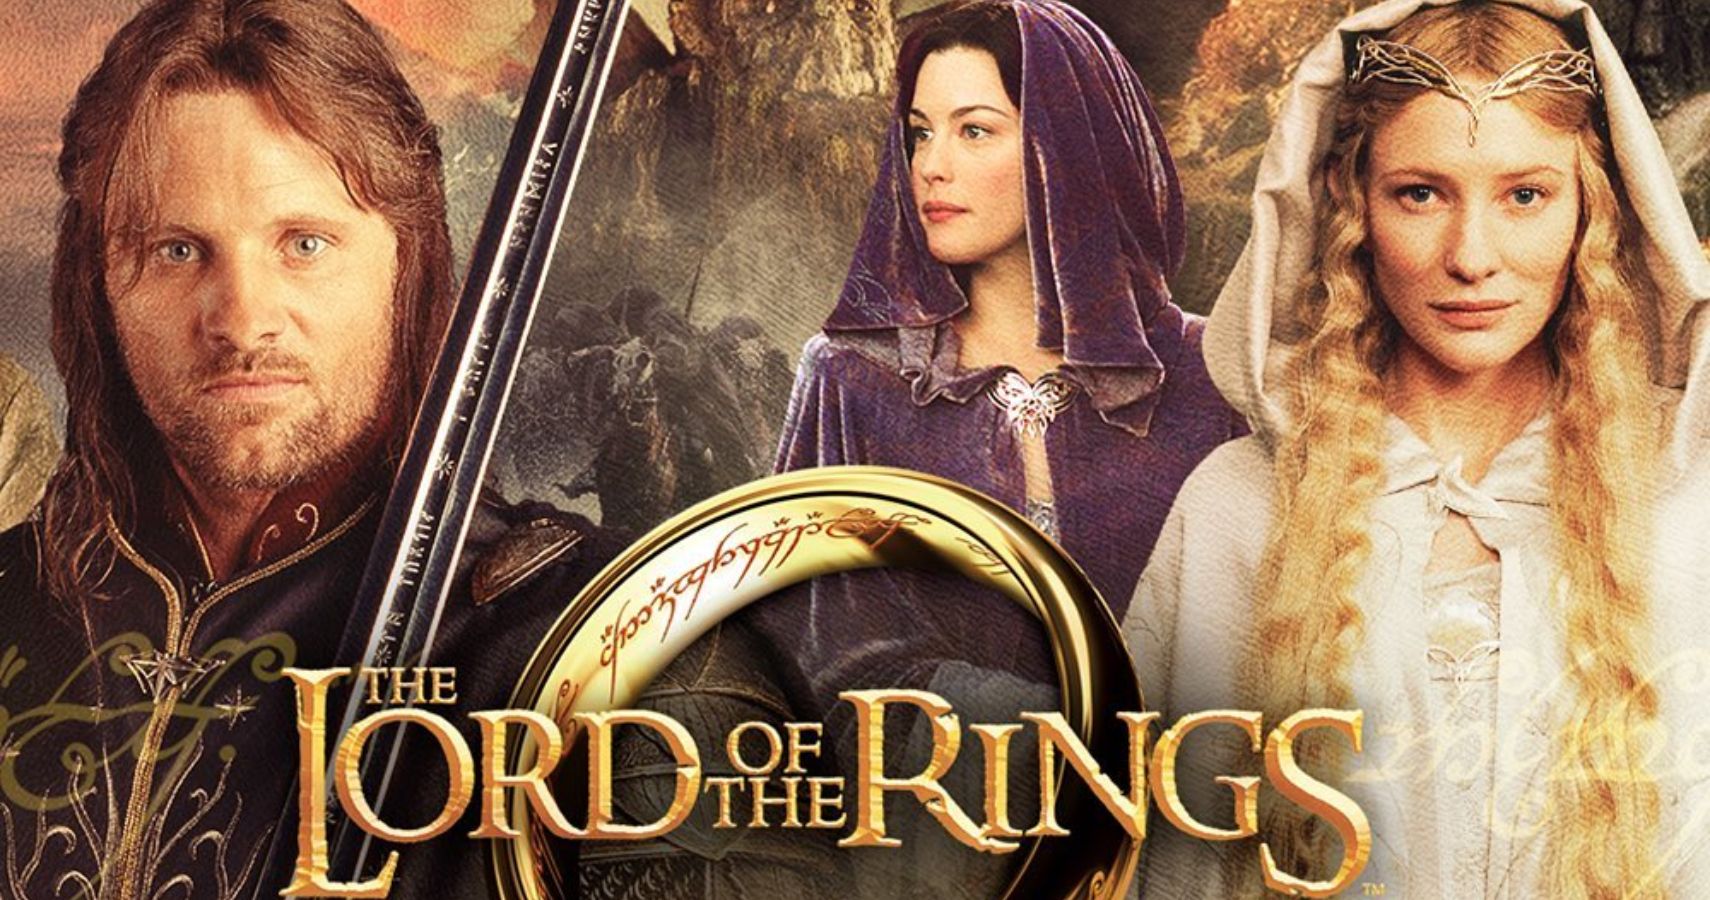 The Lord Of The Rings Trilogy At Worldwide Box Office: 'Near $3 Billion'  Tale Of One Of The Highly Acclaimed Franchises